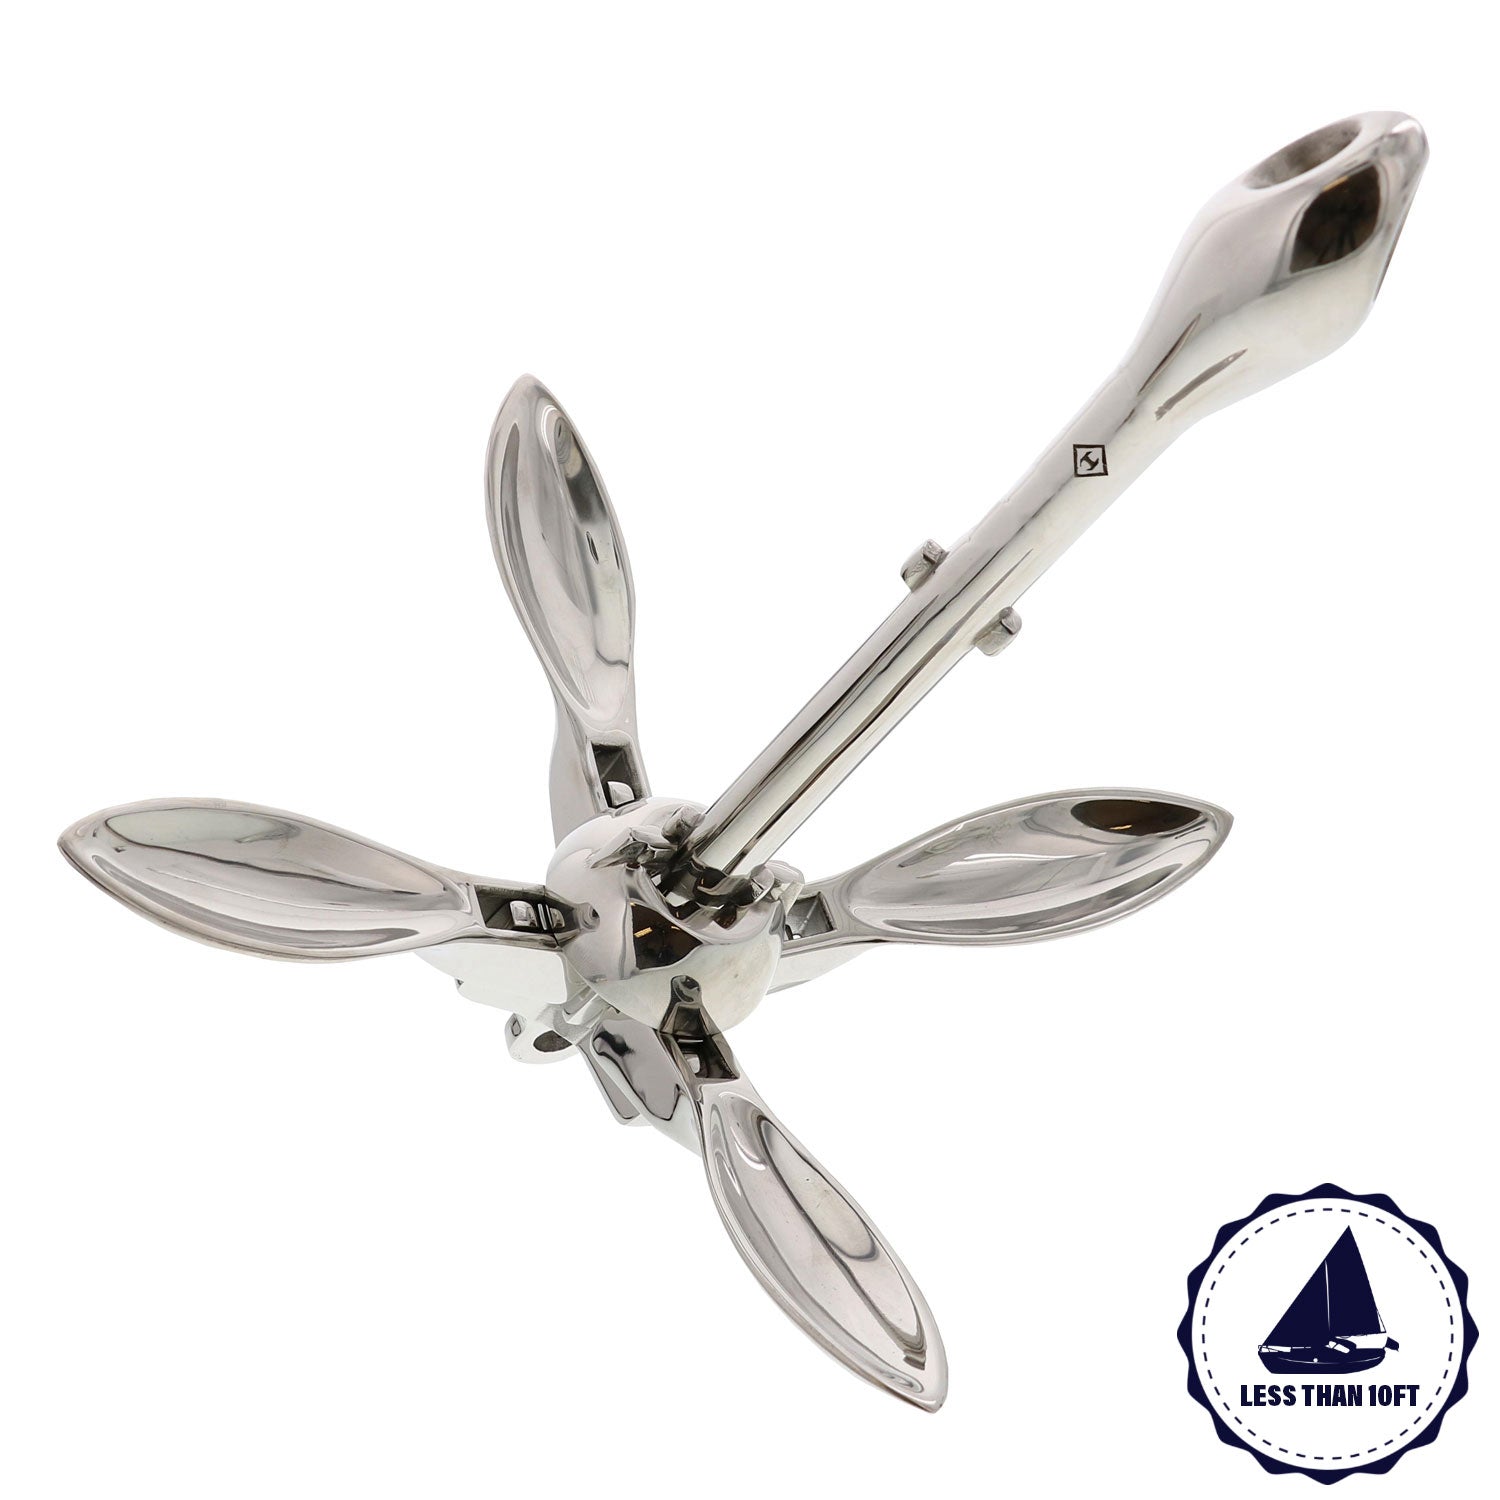 3.3 lbs Stainless Steel Folding Anchor